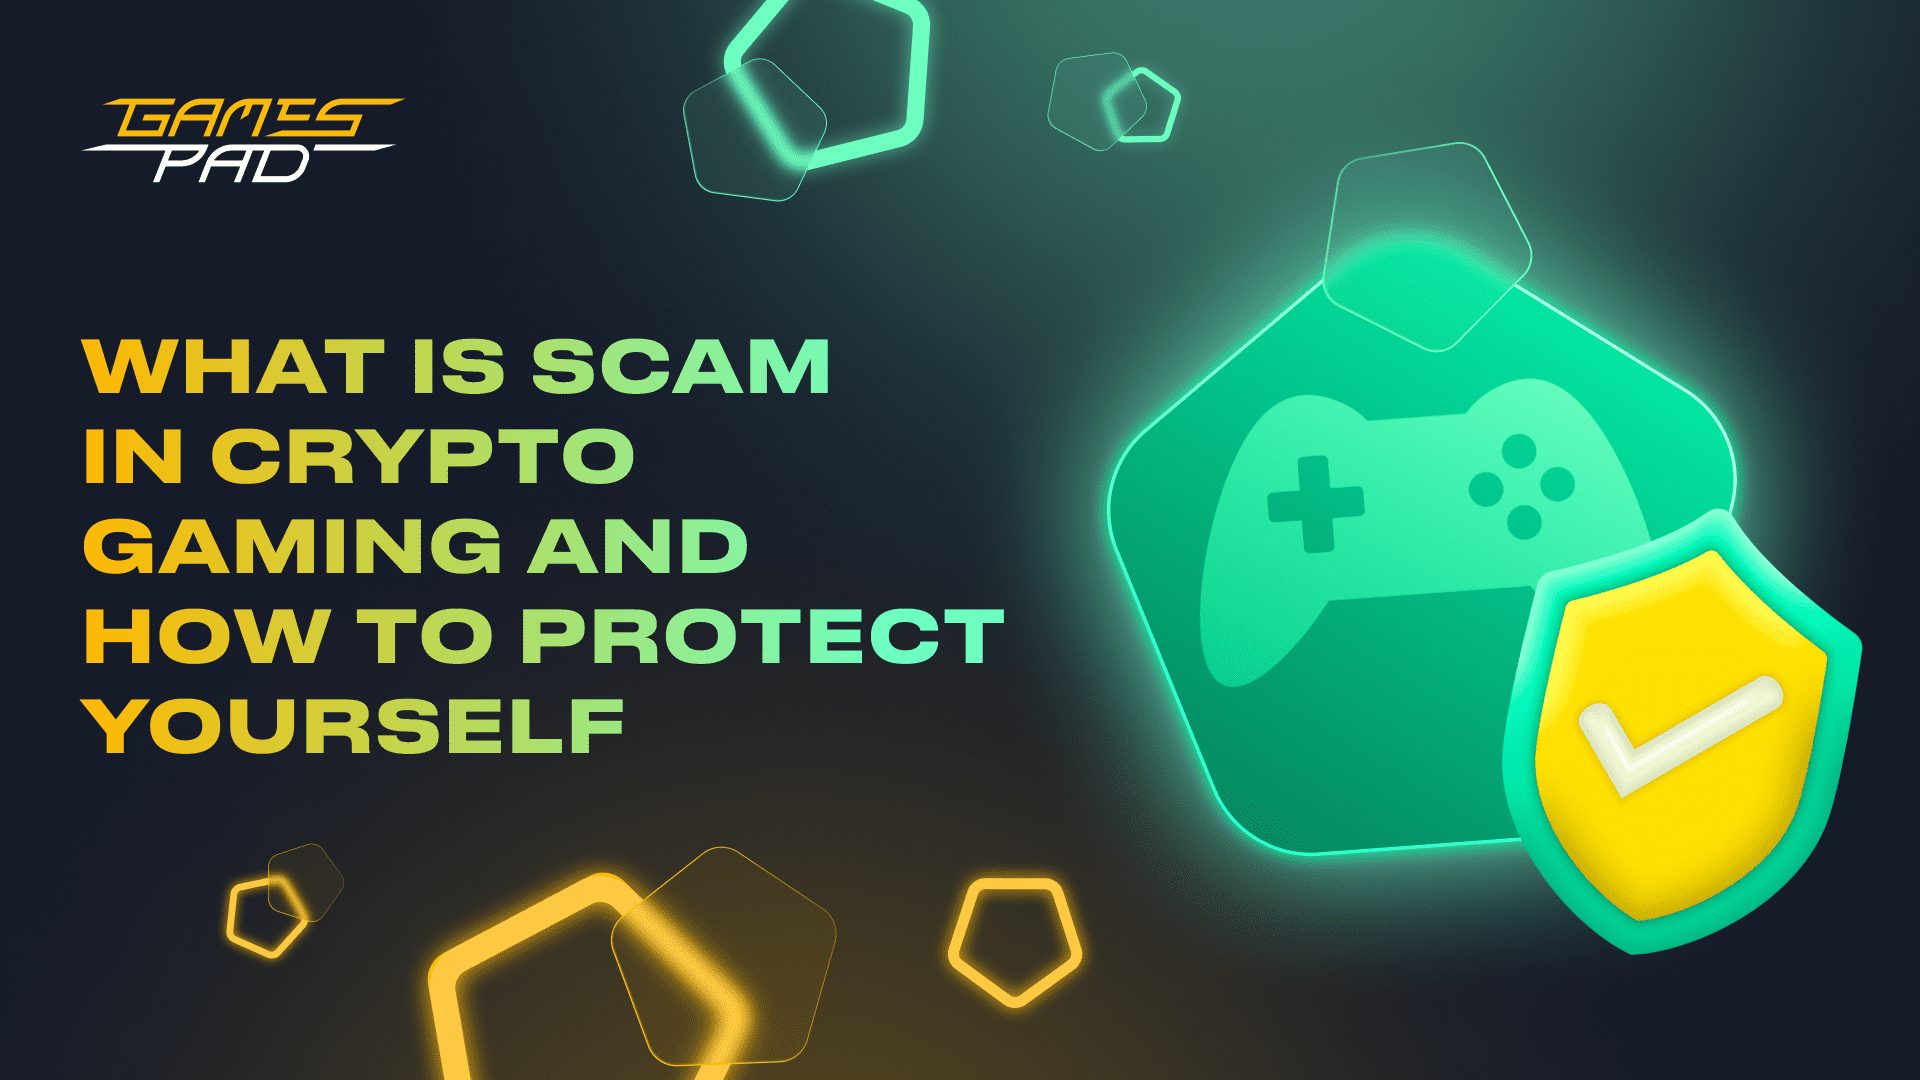 What Is Scam In Crypto Gaming And How to Protect Yourself